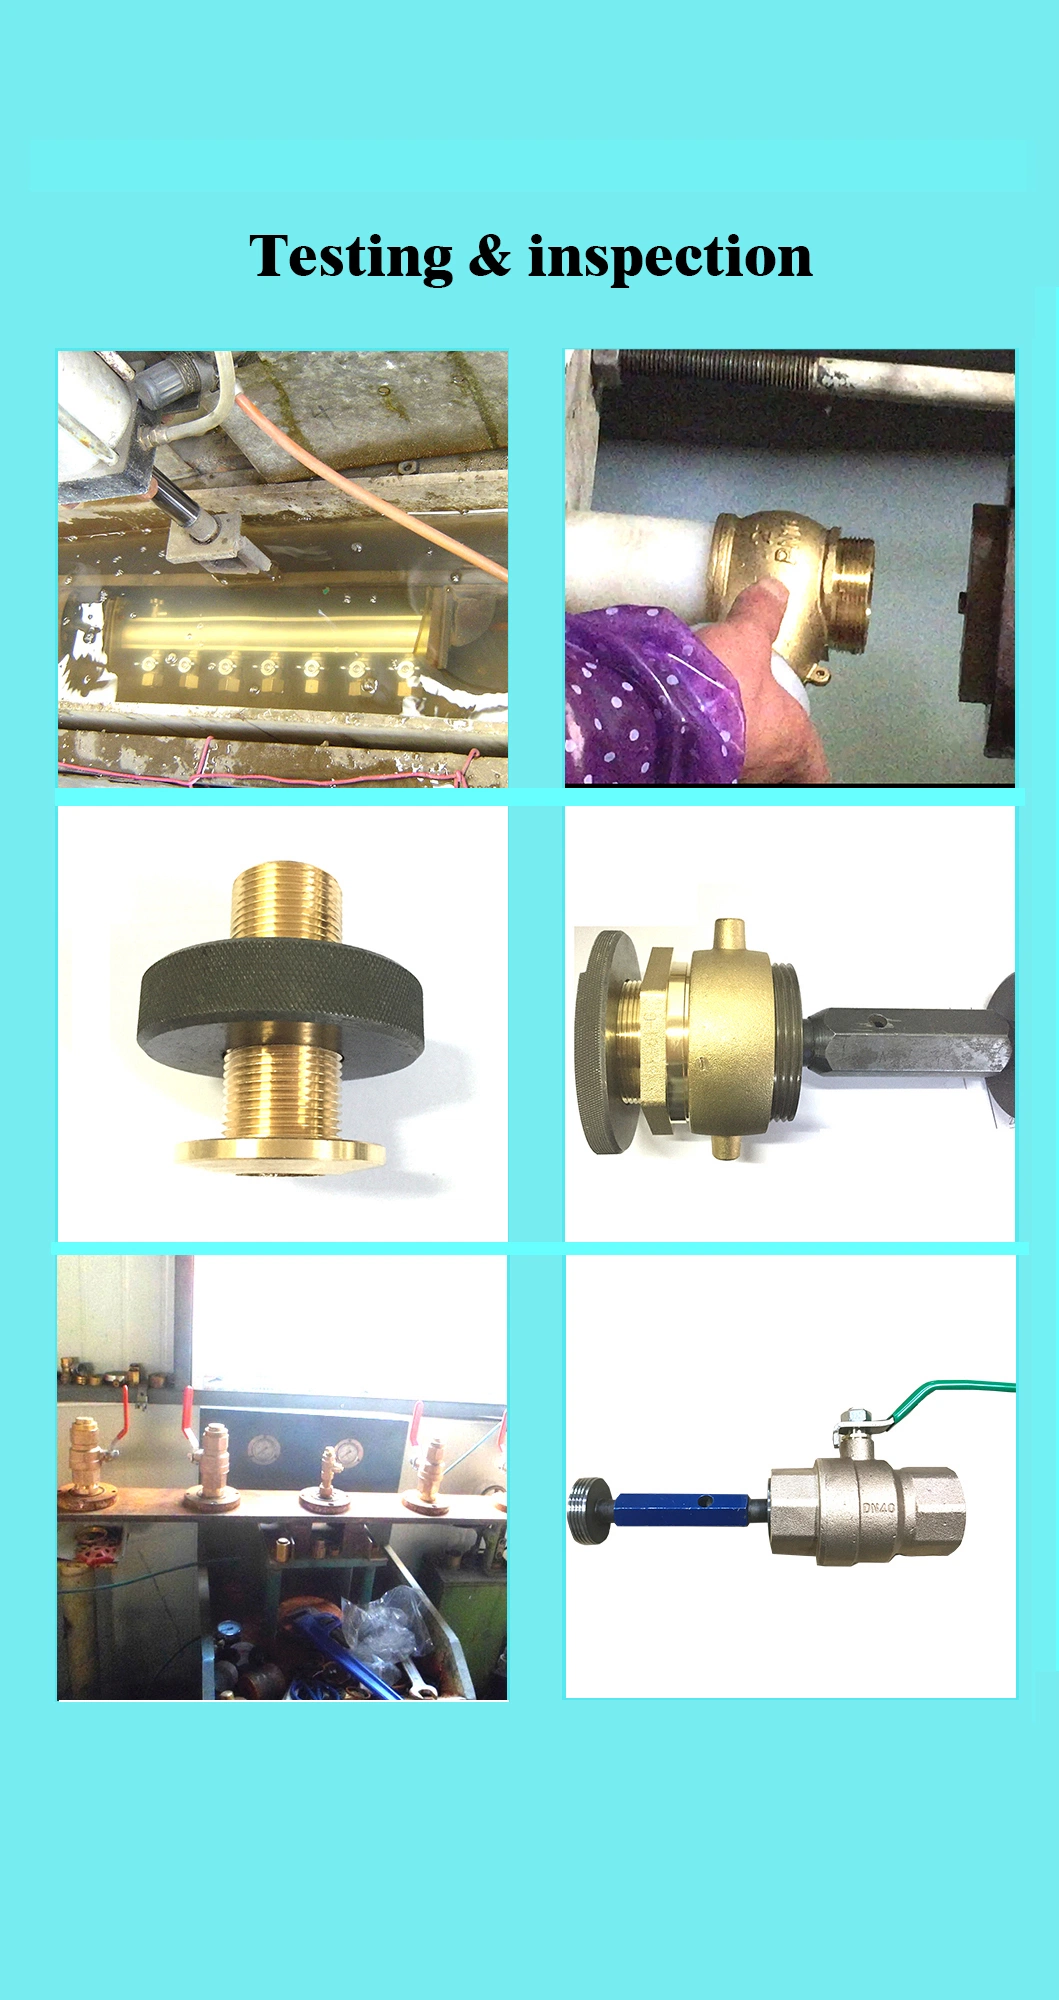 All Types of Water Meter Fitting, PPR Insert, Brass Pex Fitting, Push Fit Fitting, Brass Fitting